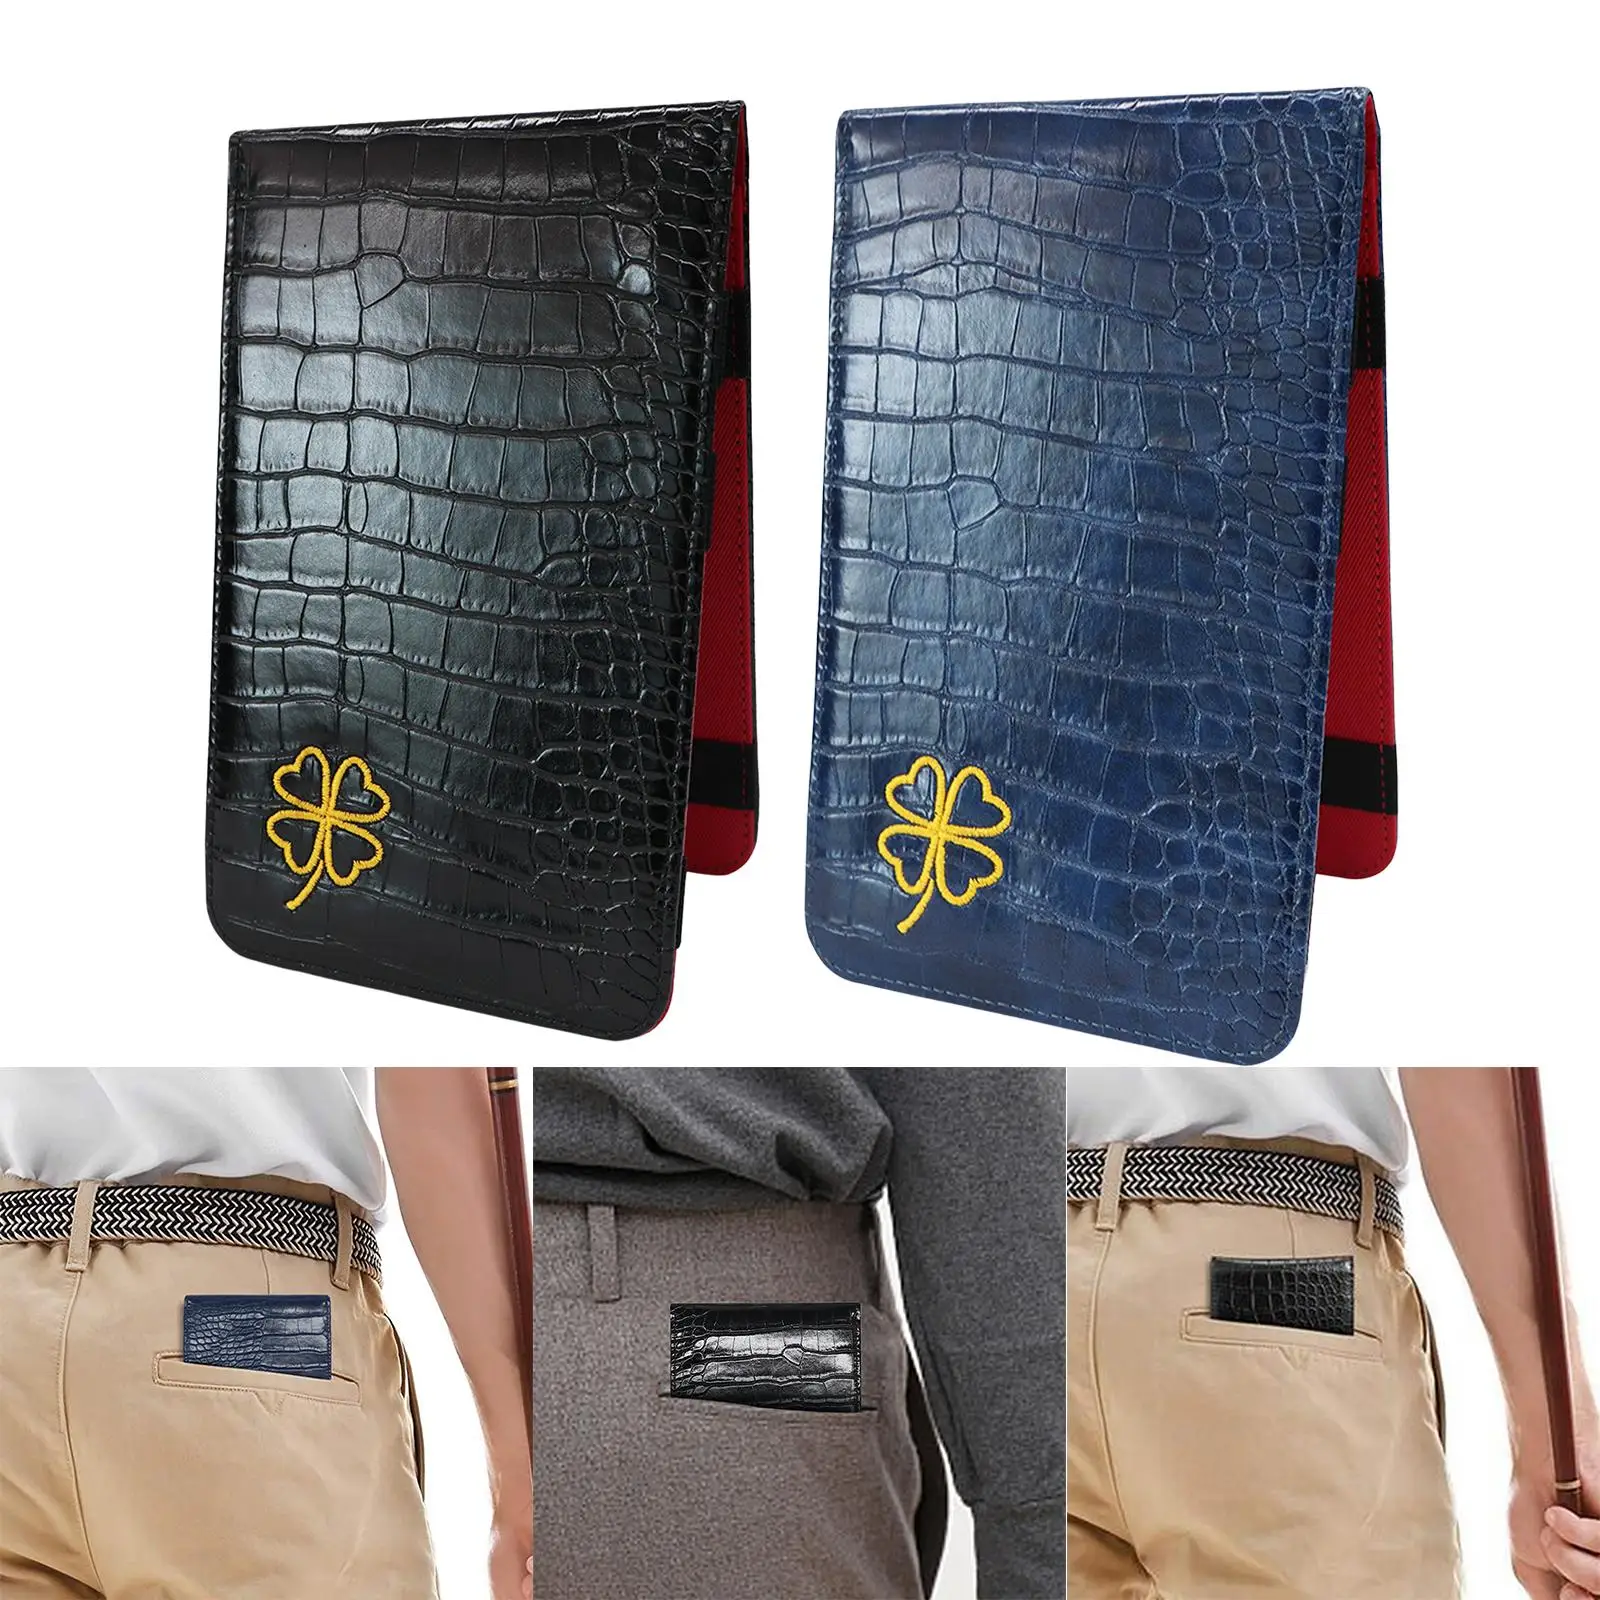 PU Yardage Book Cover Golf Score Cards Wallet Gift Golf Accessories with Elastic Bands Portable Golf Scorecard Holder for Family